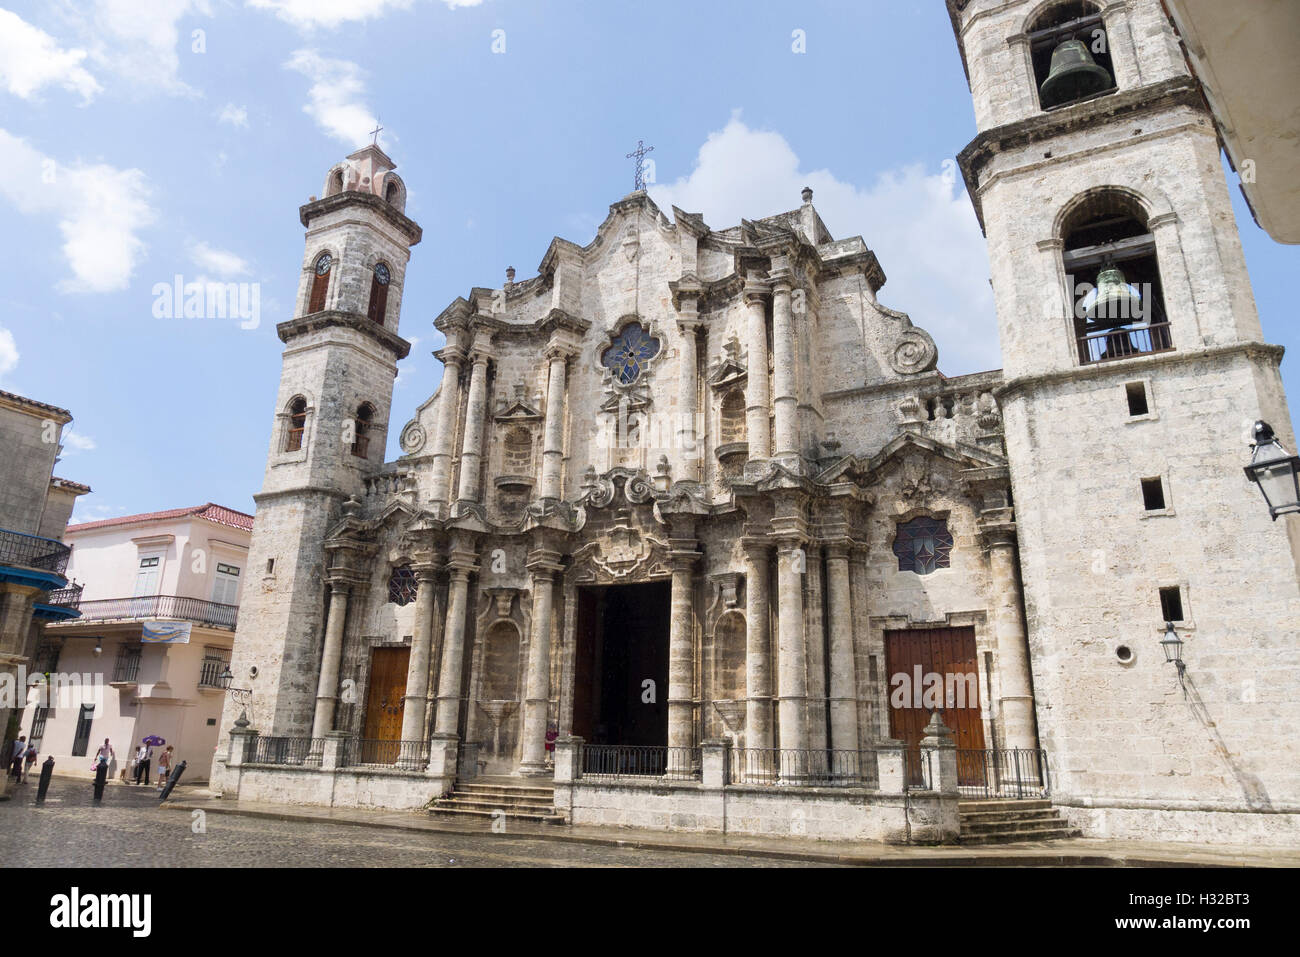 The historic Cathedral of the Virgin Mary of the Immaculate Conception built in 1777 in Cathedral square, Havana Cuba Stock Photo